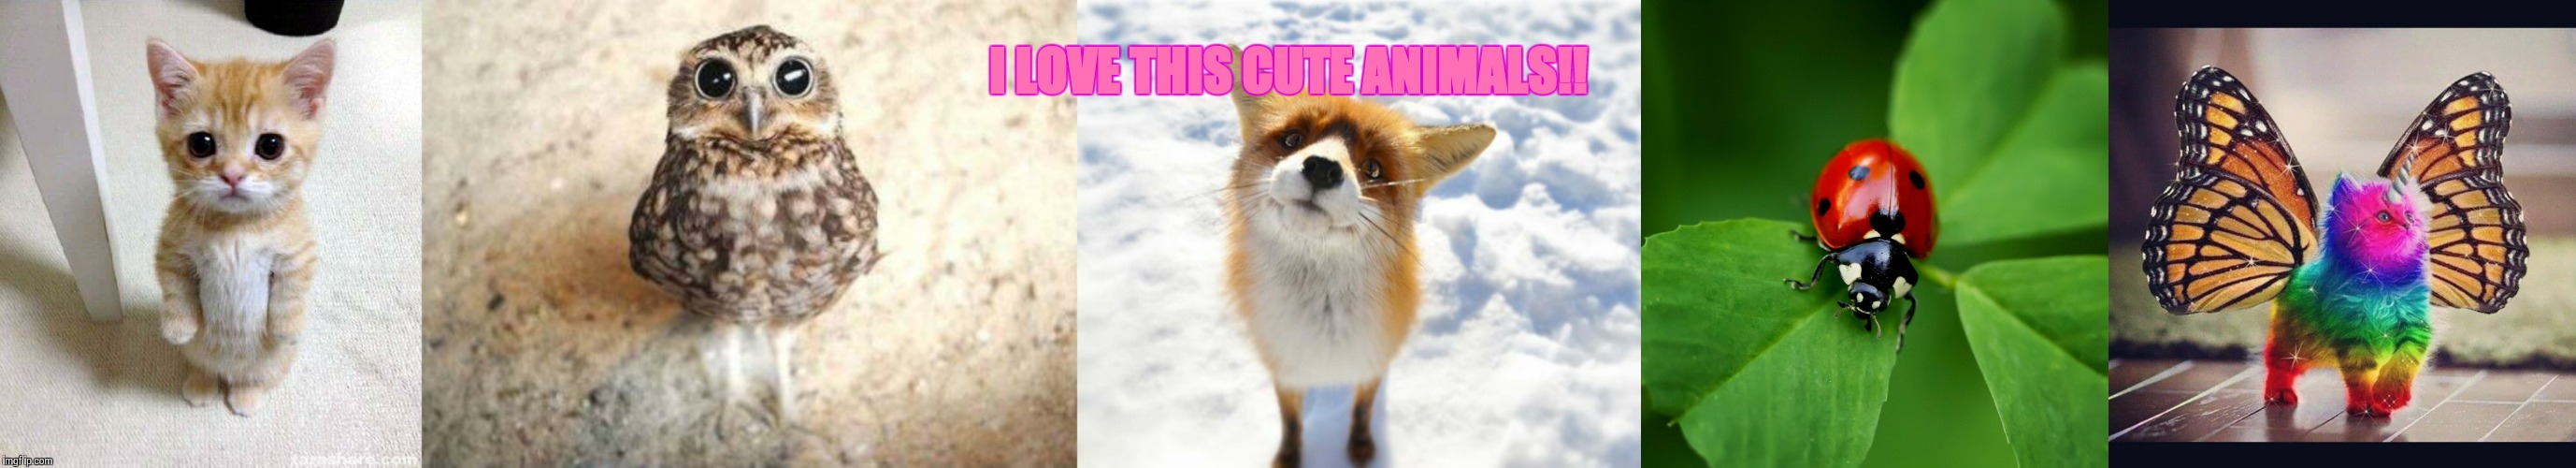 I LOVE THIS CUTE ANIMALS!! | image tagged in memes,cute cat,what does the fox say,cute owl,ladybug,rainbow butterfly unicorn kitten | made w/ Imgflip meme maker